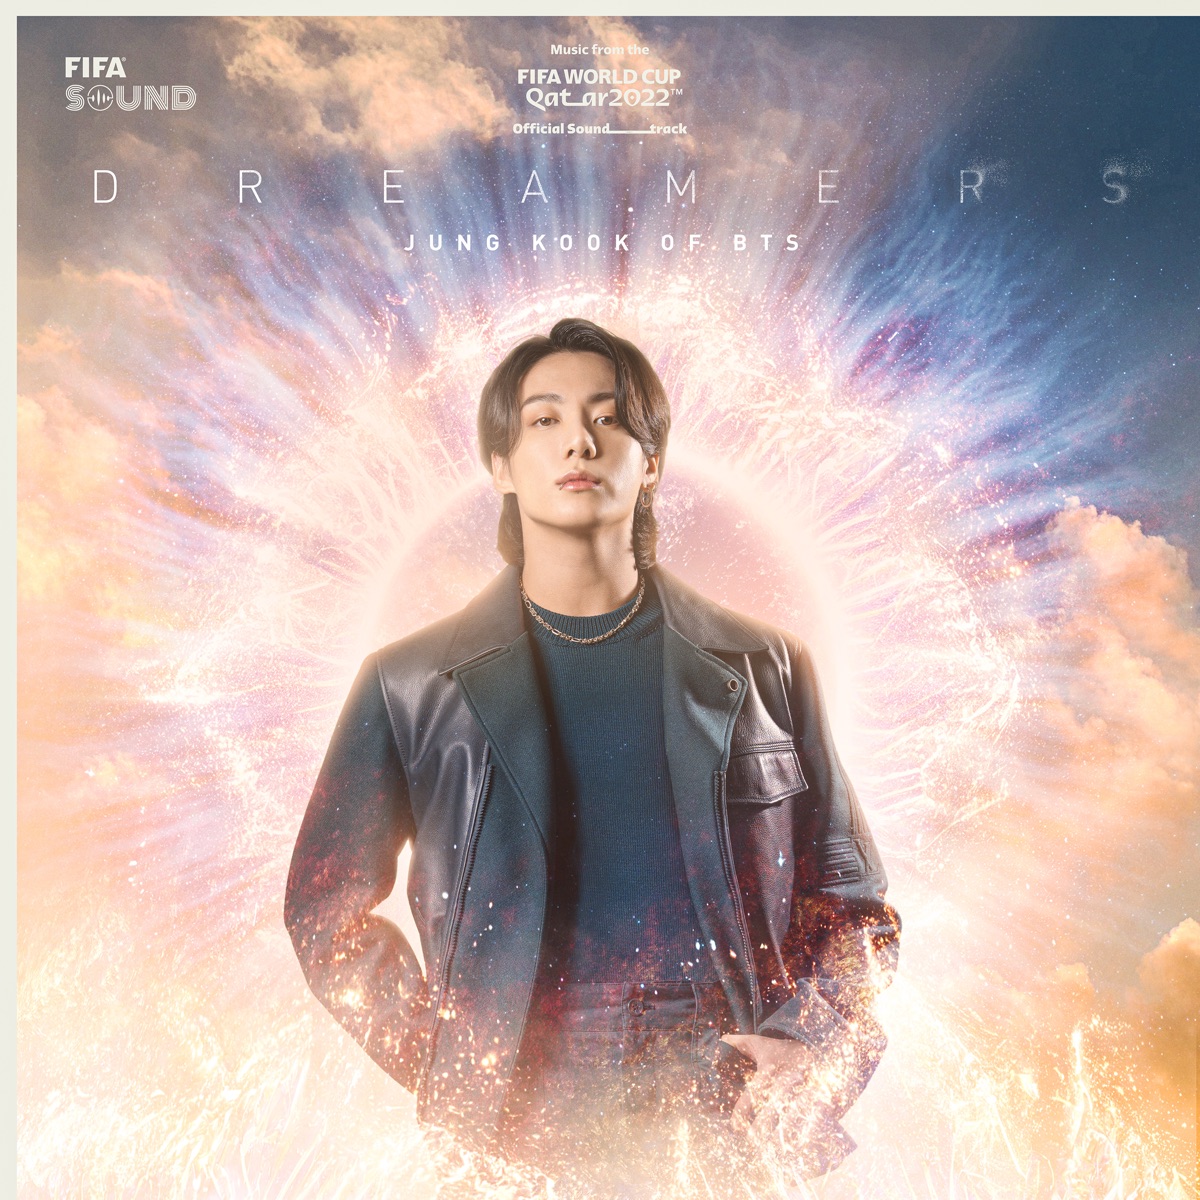 『Jung Kook (BTS) - Dreamers』収録の『Jung Kook (BTS) - Dreamers [Music from the Fifa World Cup Qatar 2022 Official Soundtrack]』ジャケット